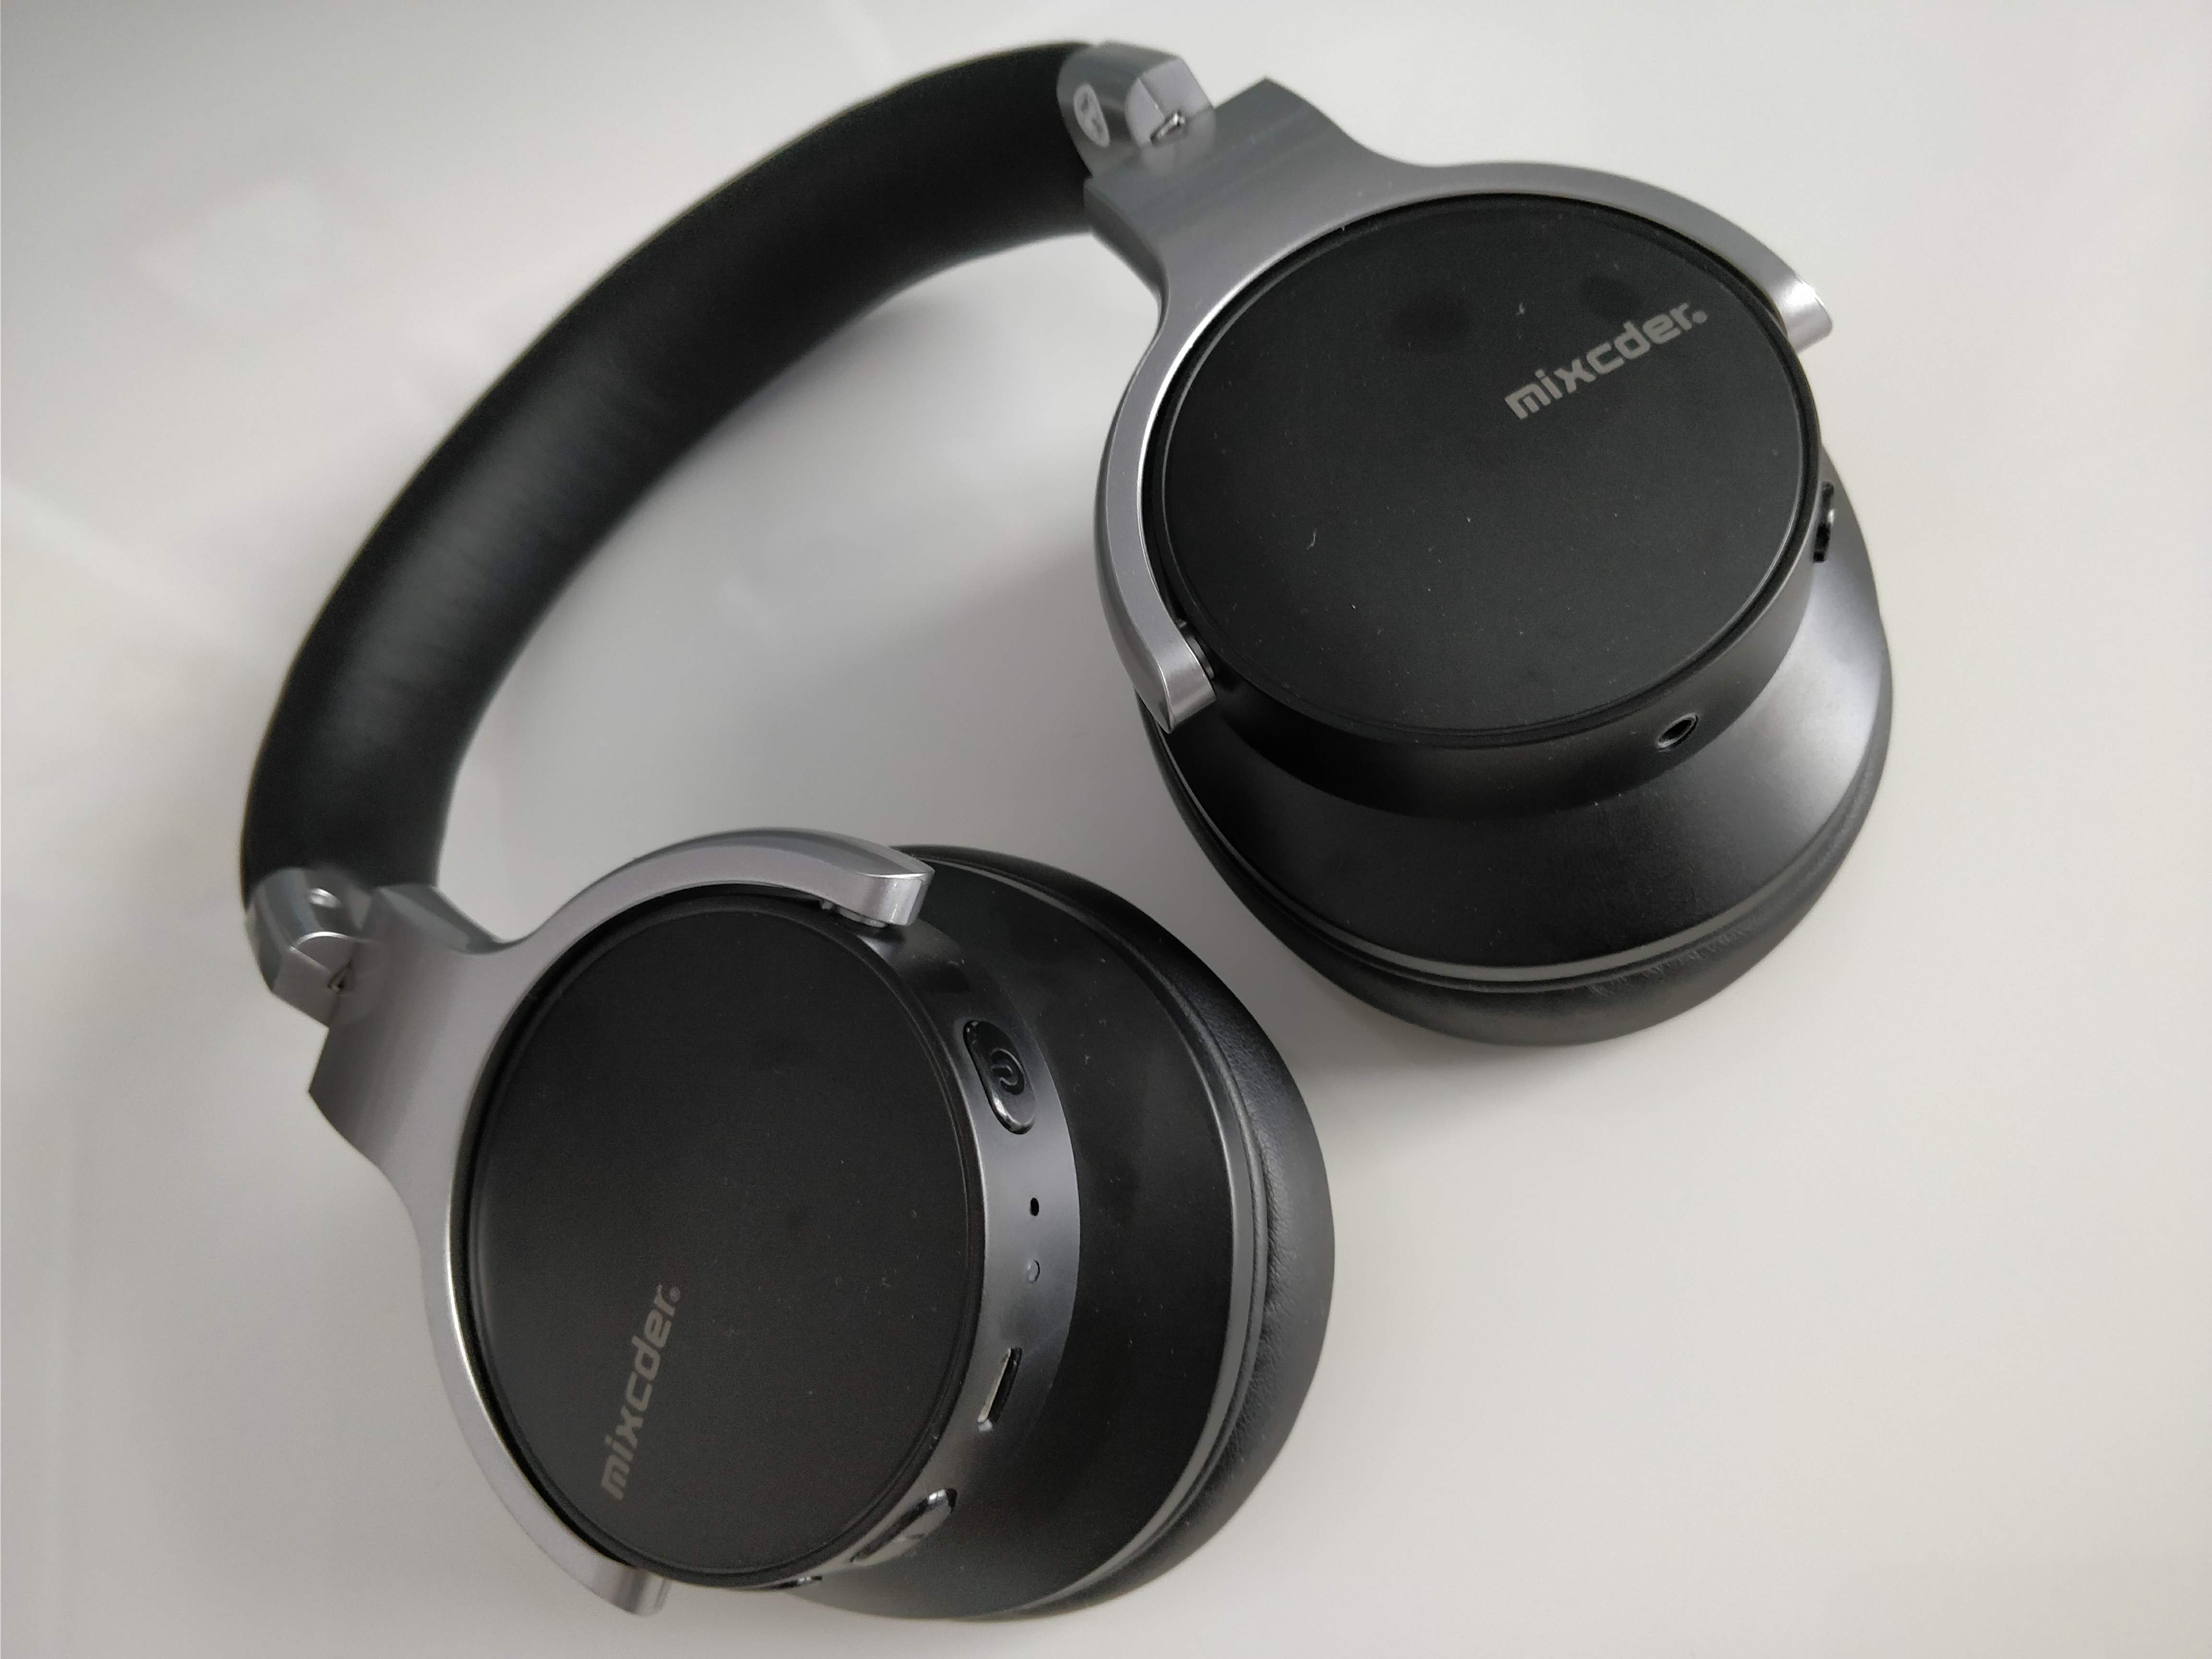 Mixcder E7 active noise cancelling headphones - Review. - Coolsmartphone